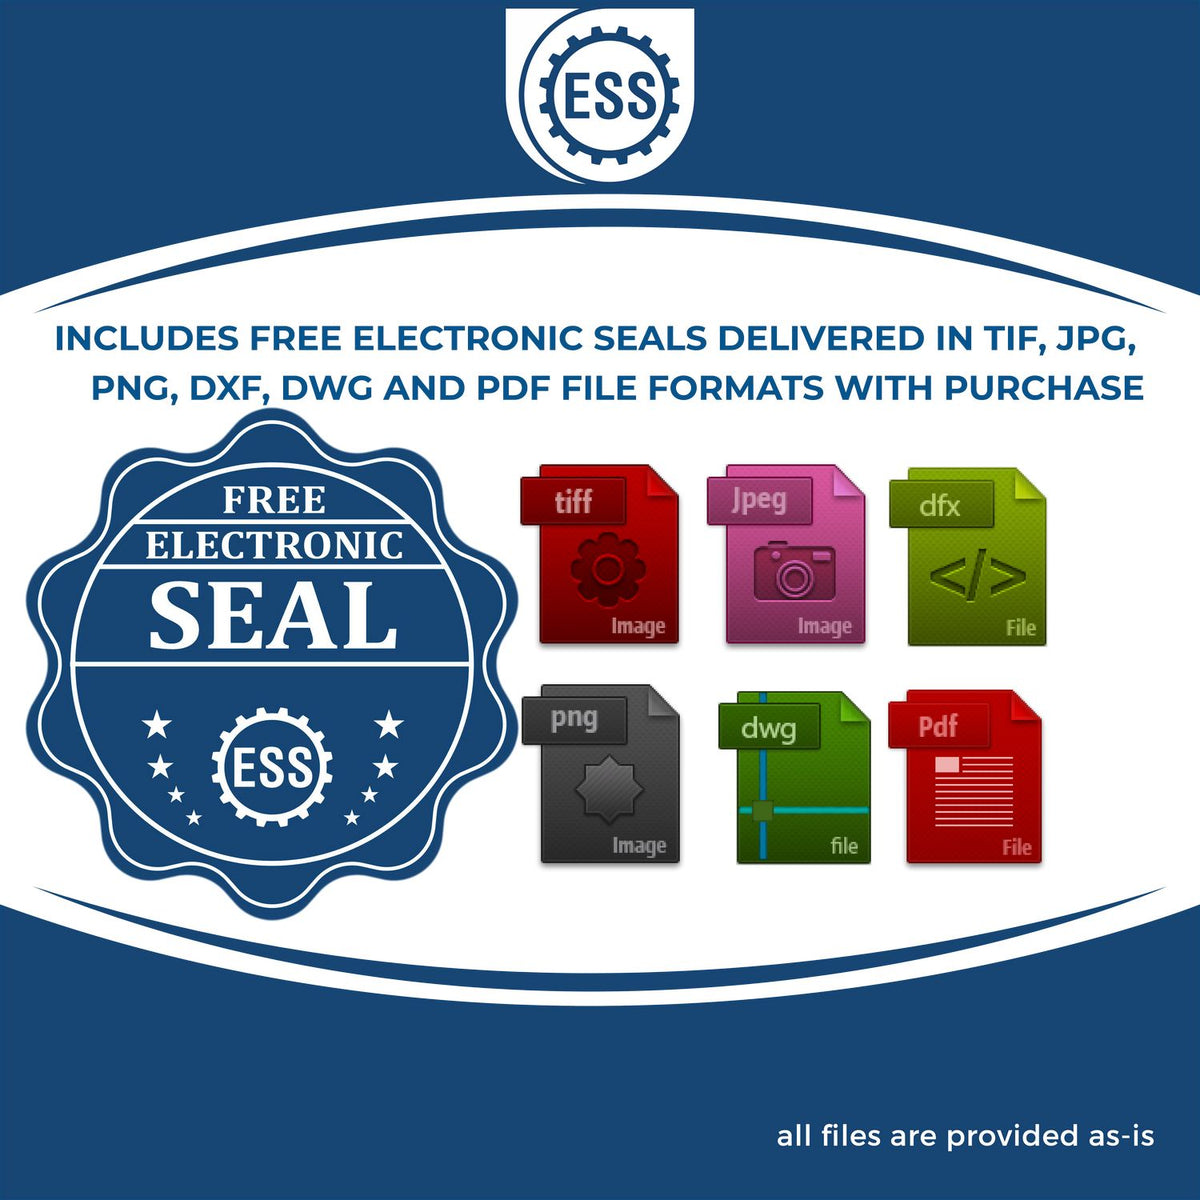 An infographic for the free electronic seal for the Rhode Island Professional Geologist Seal Stamp illustrating the different file type icons such as DXF, DWG, TIF, JPG and PNG.